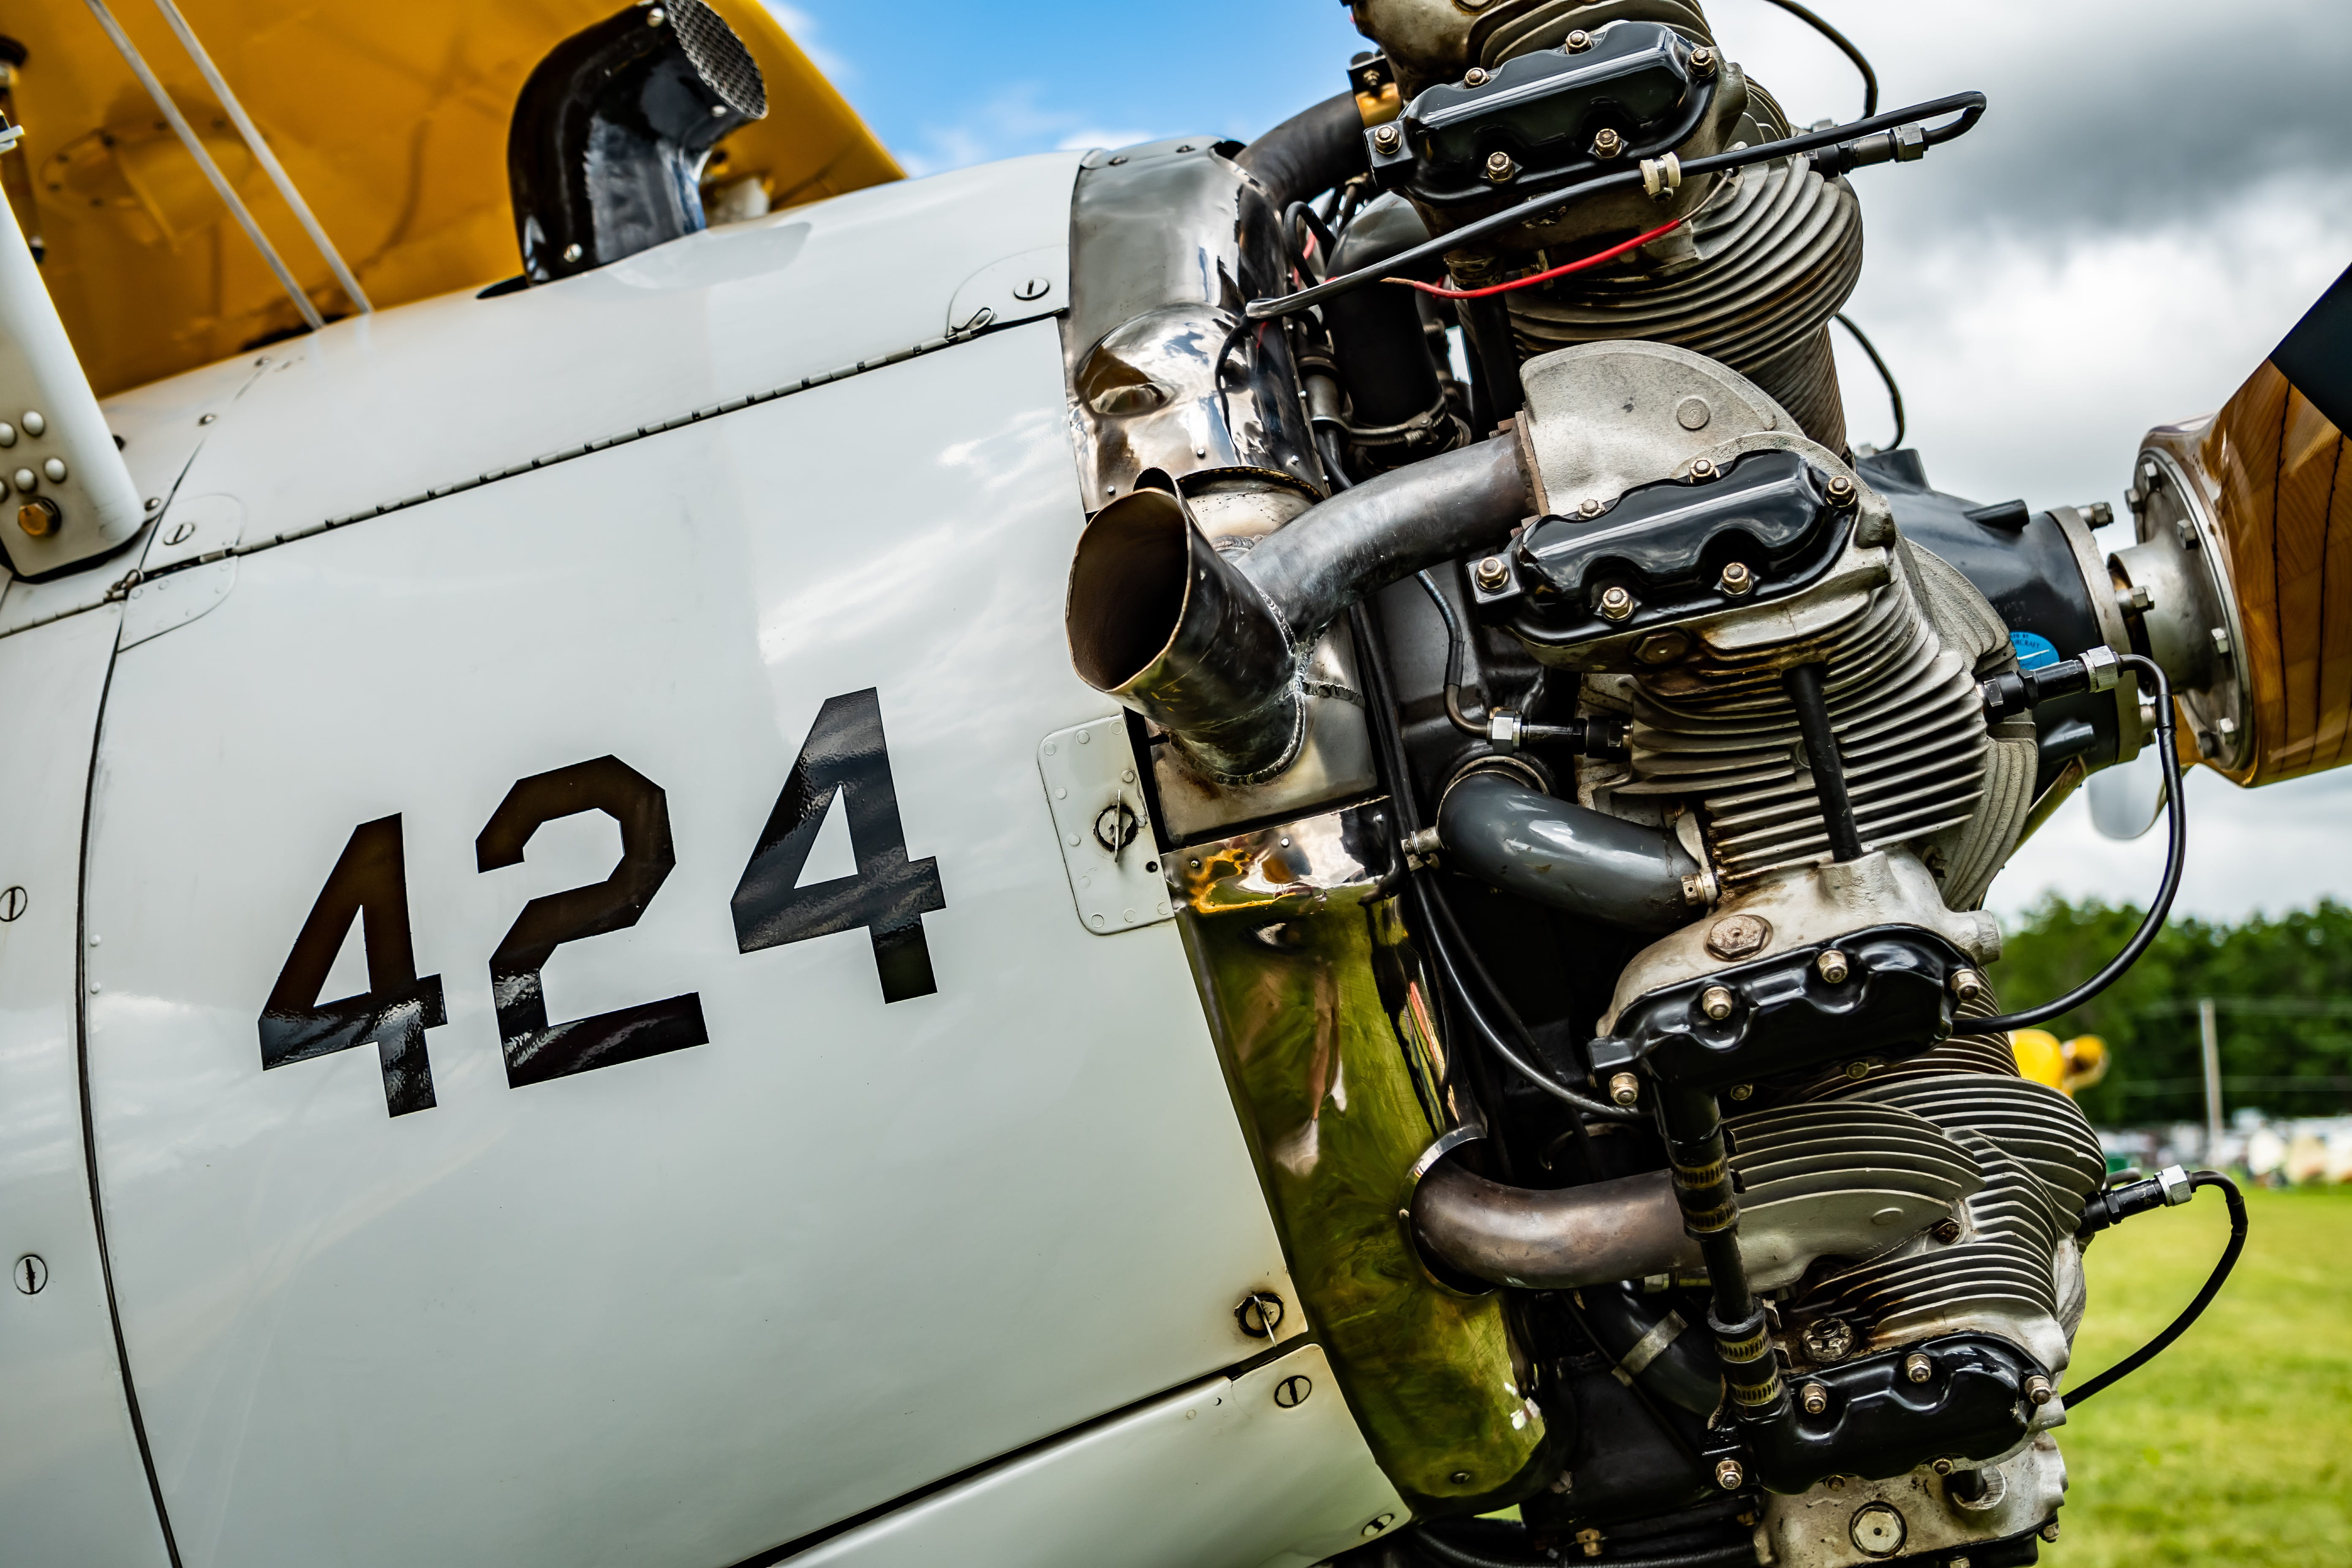 aircraft, vintage, old, classic, aviation, retro, plane, airshow